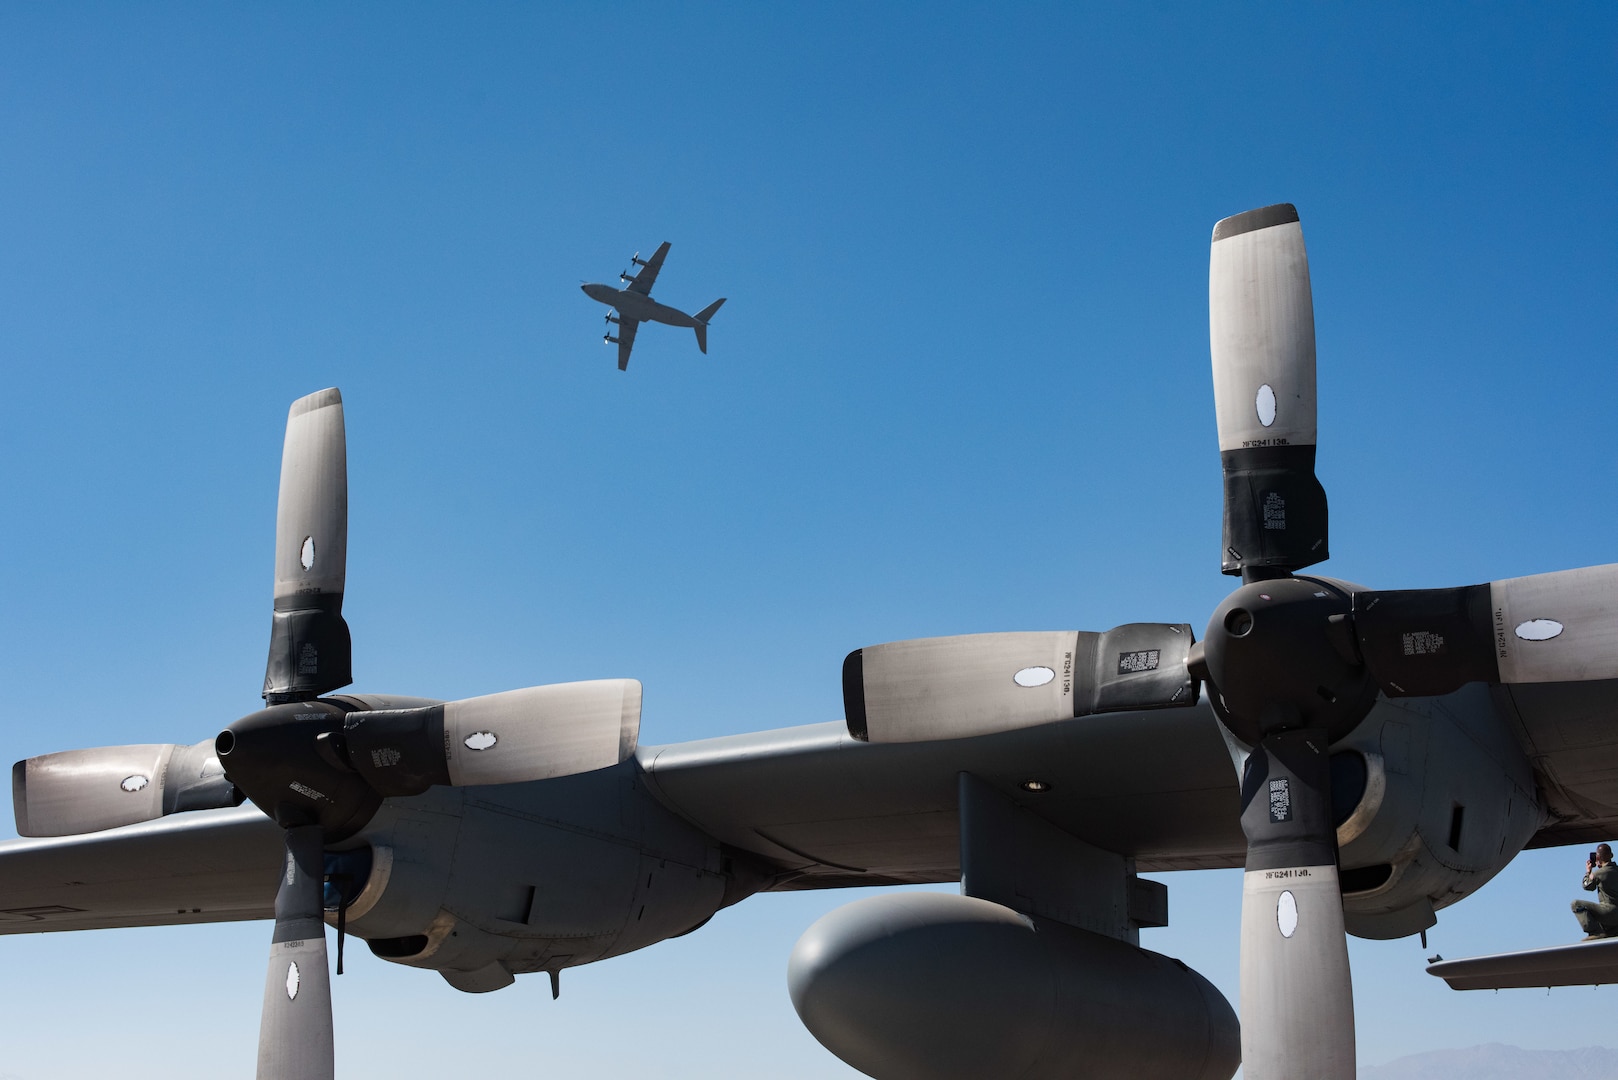 A Chilean Air Force C-130 flies above a Texas Air National Guard C-130 Hercules during the FIDAE 2018 international airshow in Santiago, Chile, April 8, 2018.  U.S. airmen participated in a variety of activities during the air show, including subject matter exchanges with the Chilean Air Force, aerial demonstrations, and interaction with the local community.  (U.S. Air Force photo by Staff Sgt. Danny Rangel)